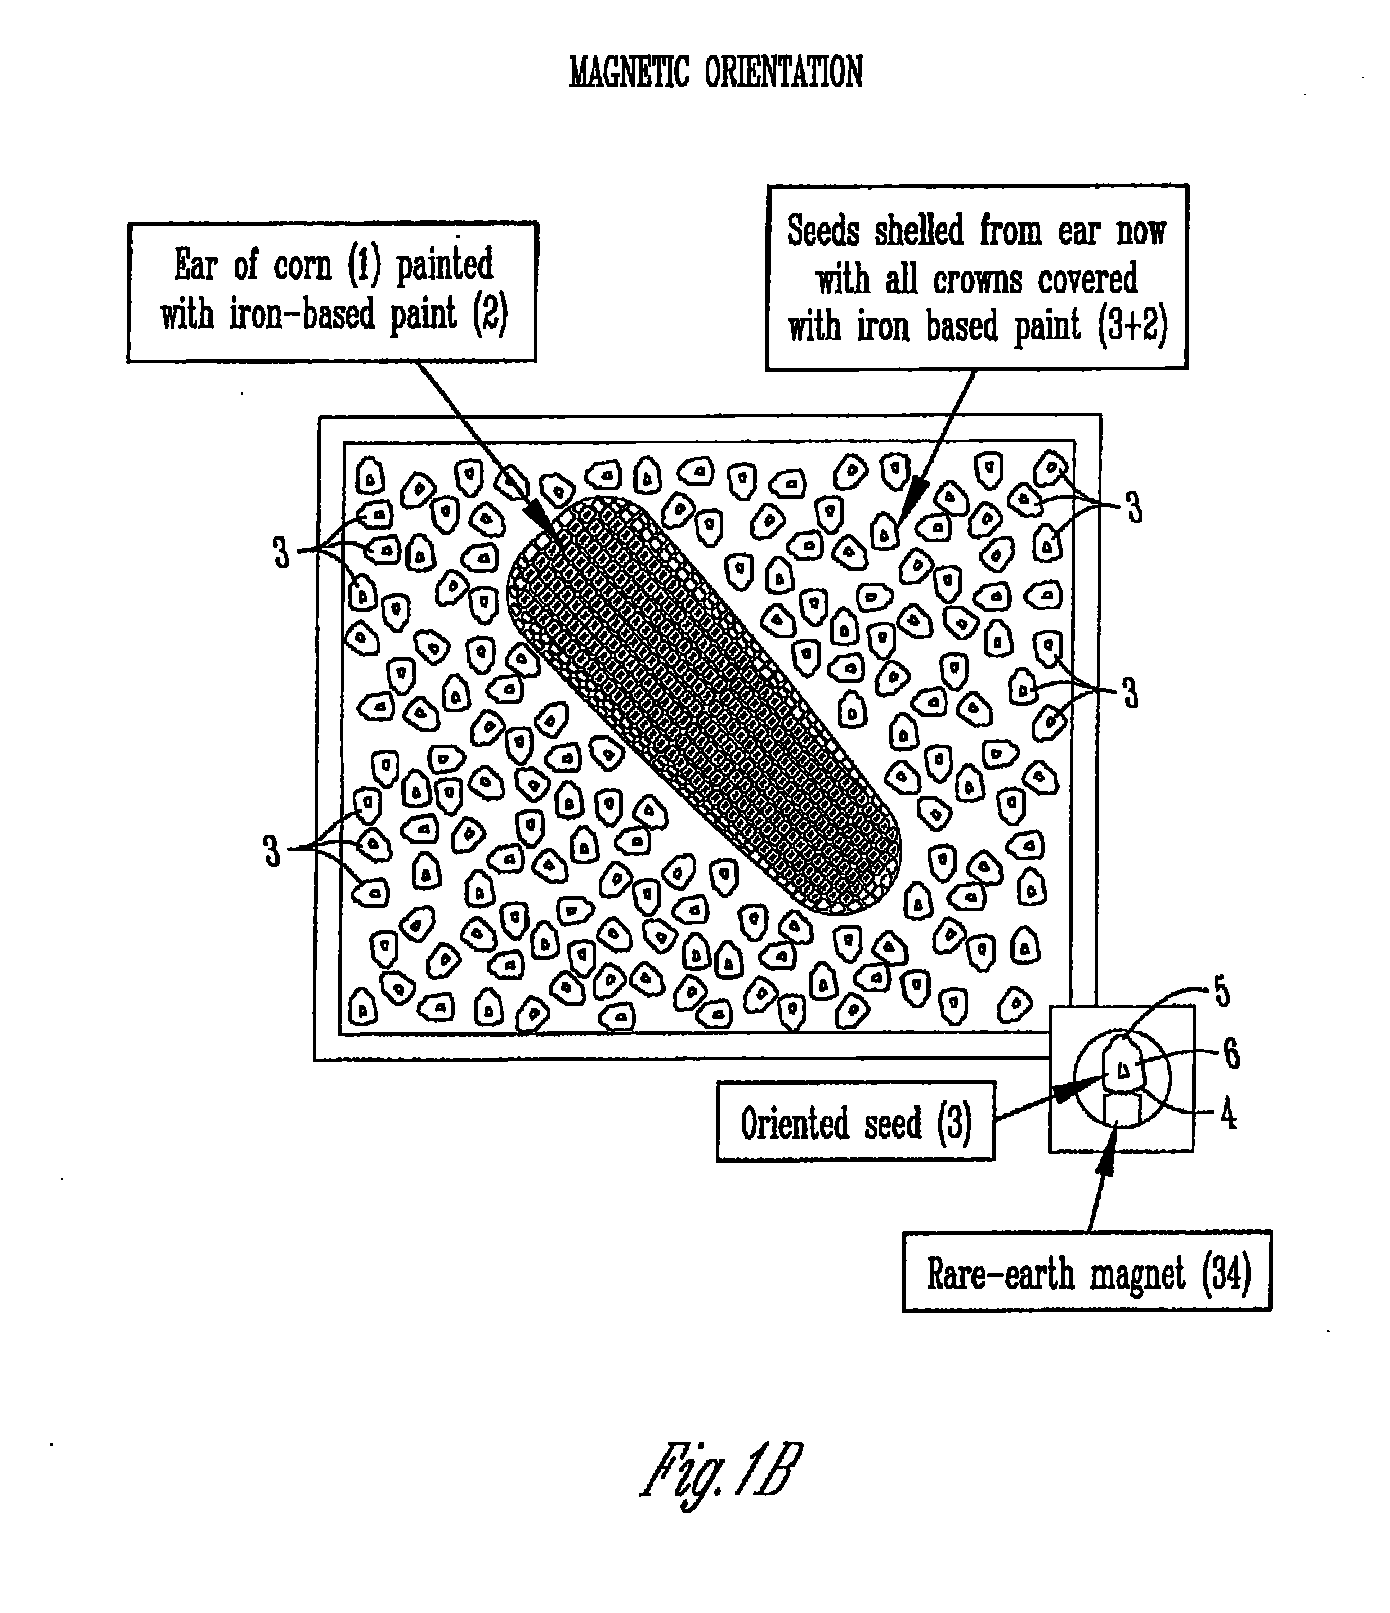 Apparatus, method and system for handling, positioning, and/or automatically orienting objects